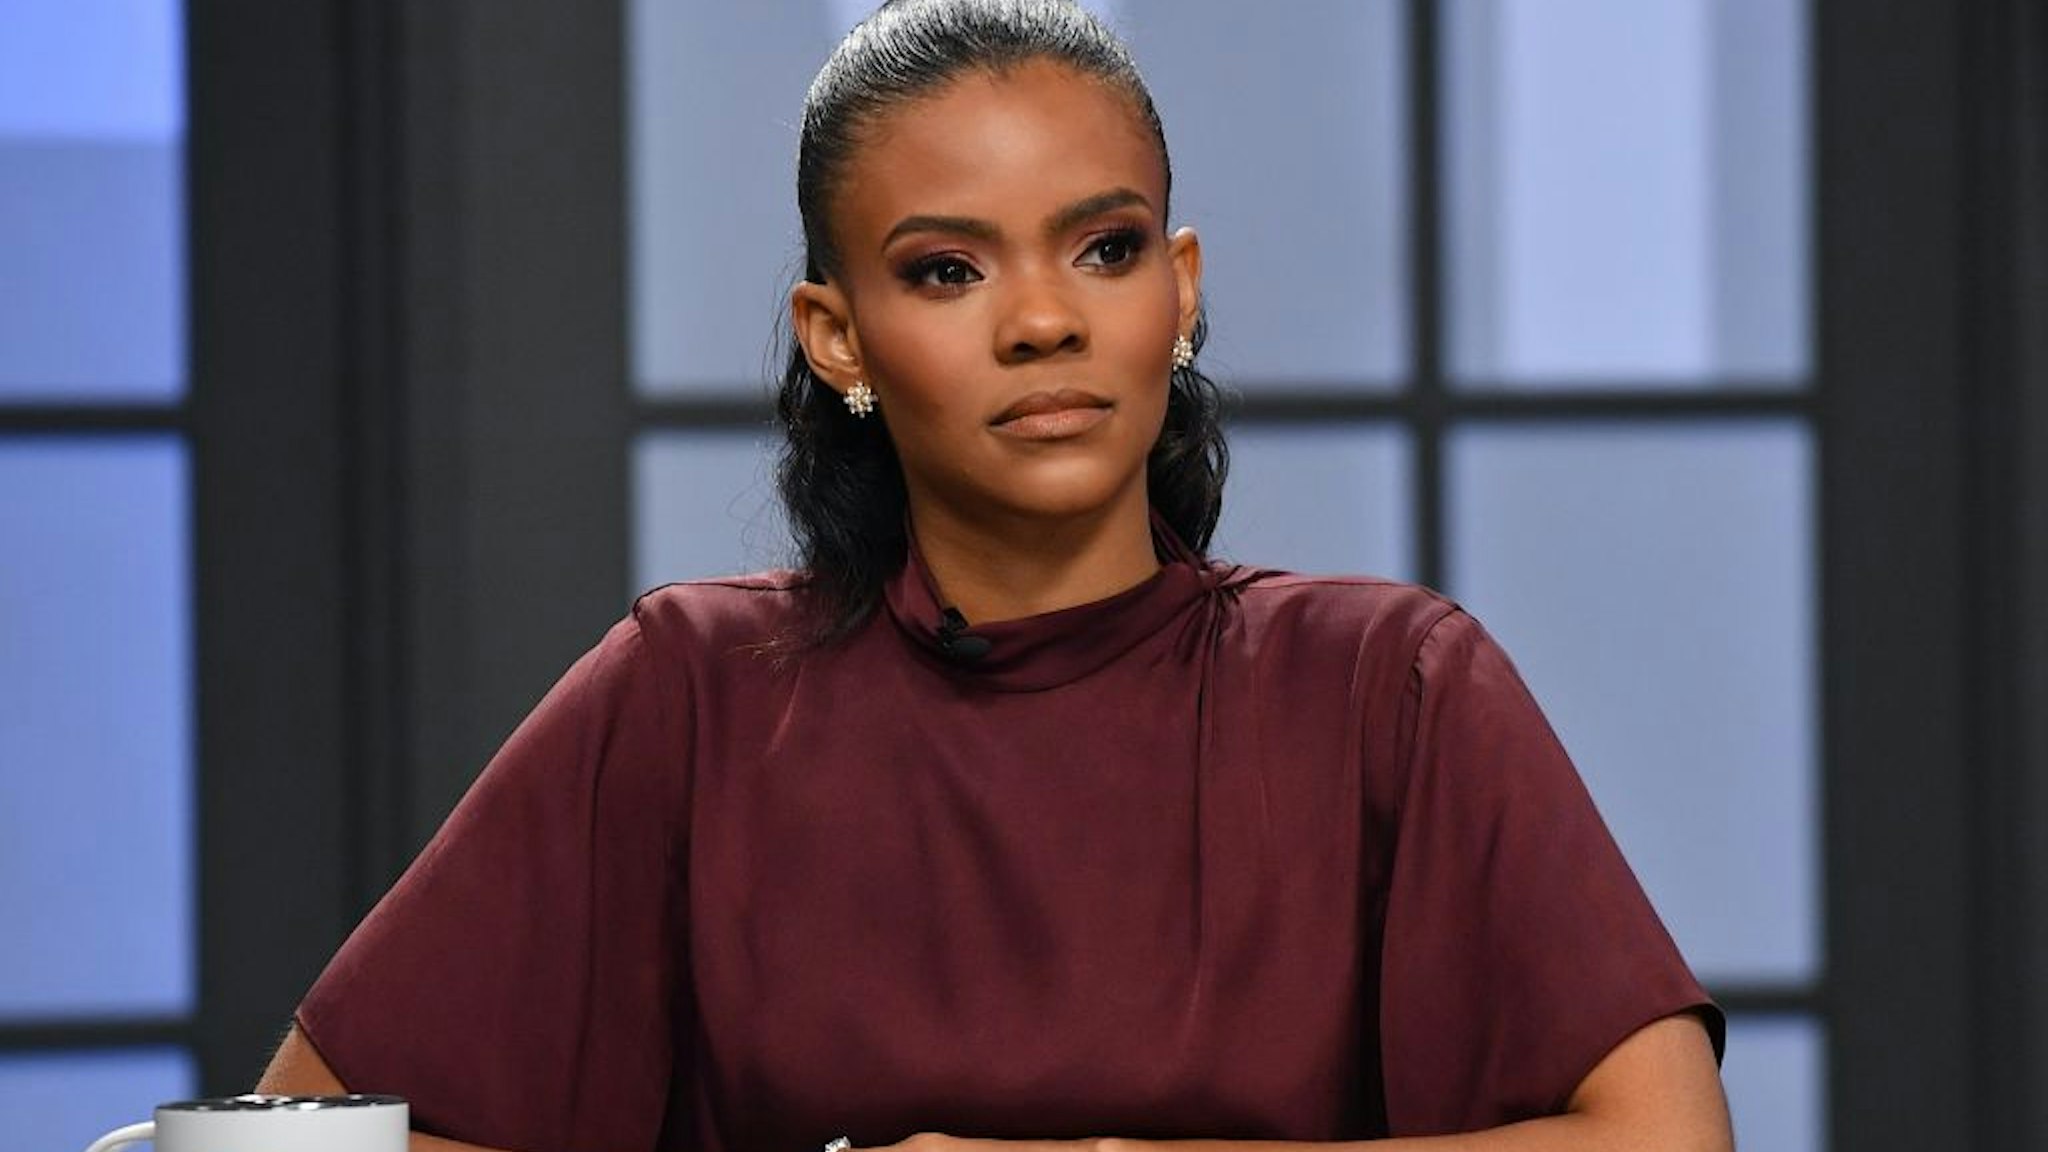 Candace Owens is seen on set of "Candace" on November 01, 2021 in Nashville, Tennessee. The show will air on Tuesday, November 2nd.